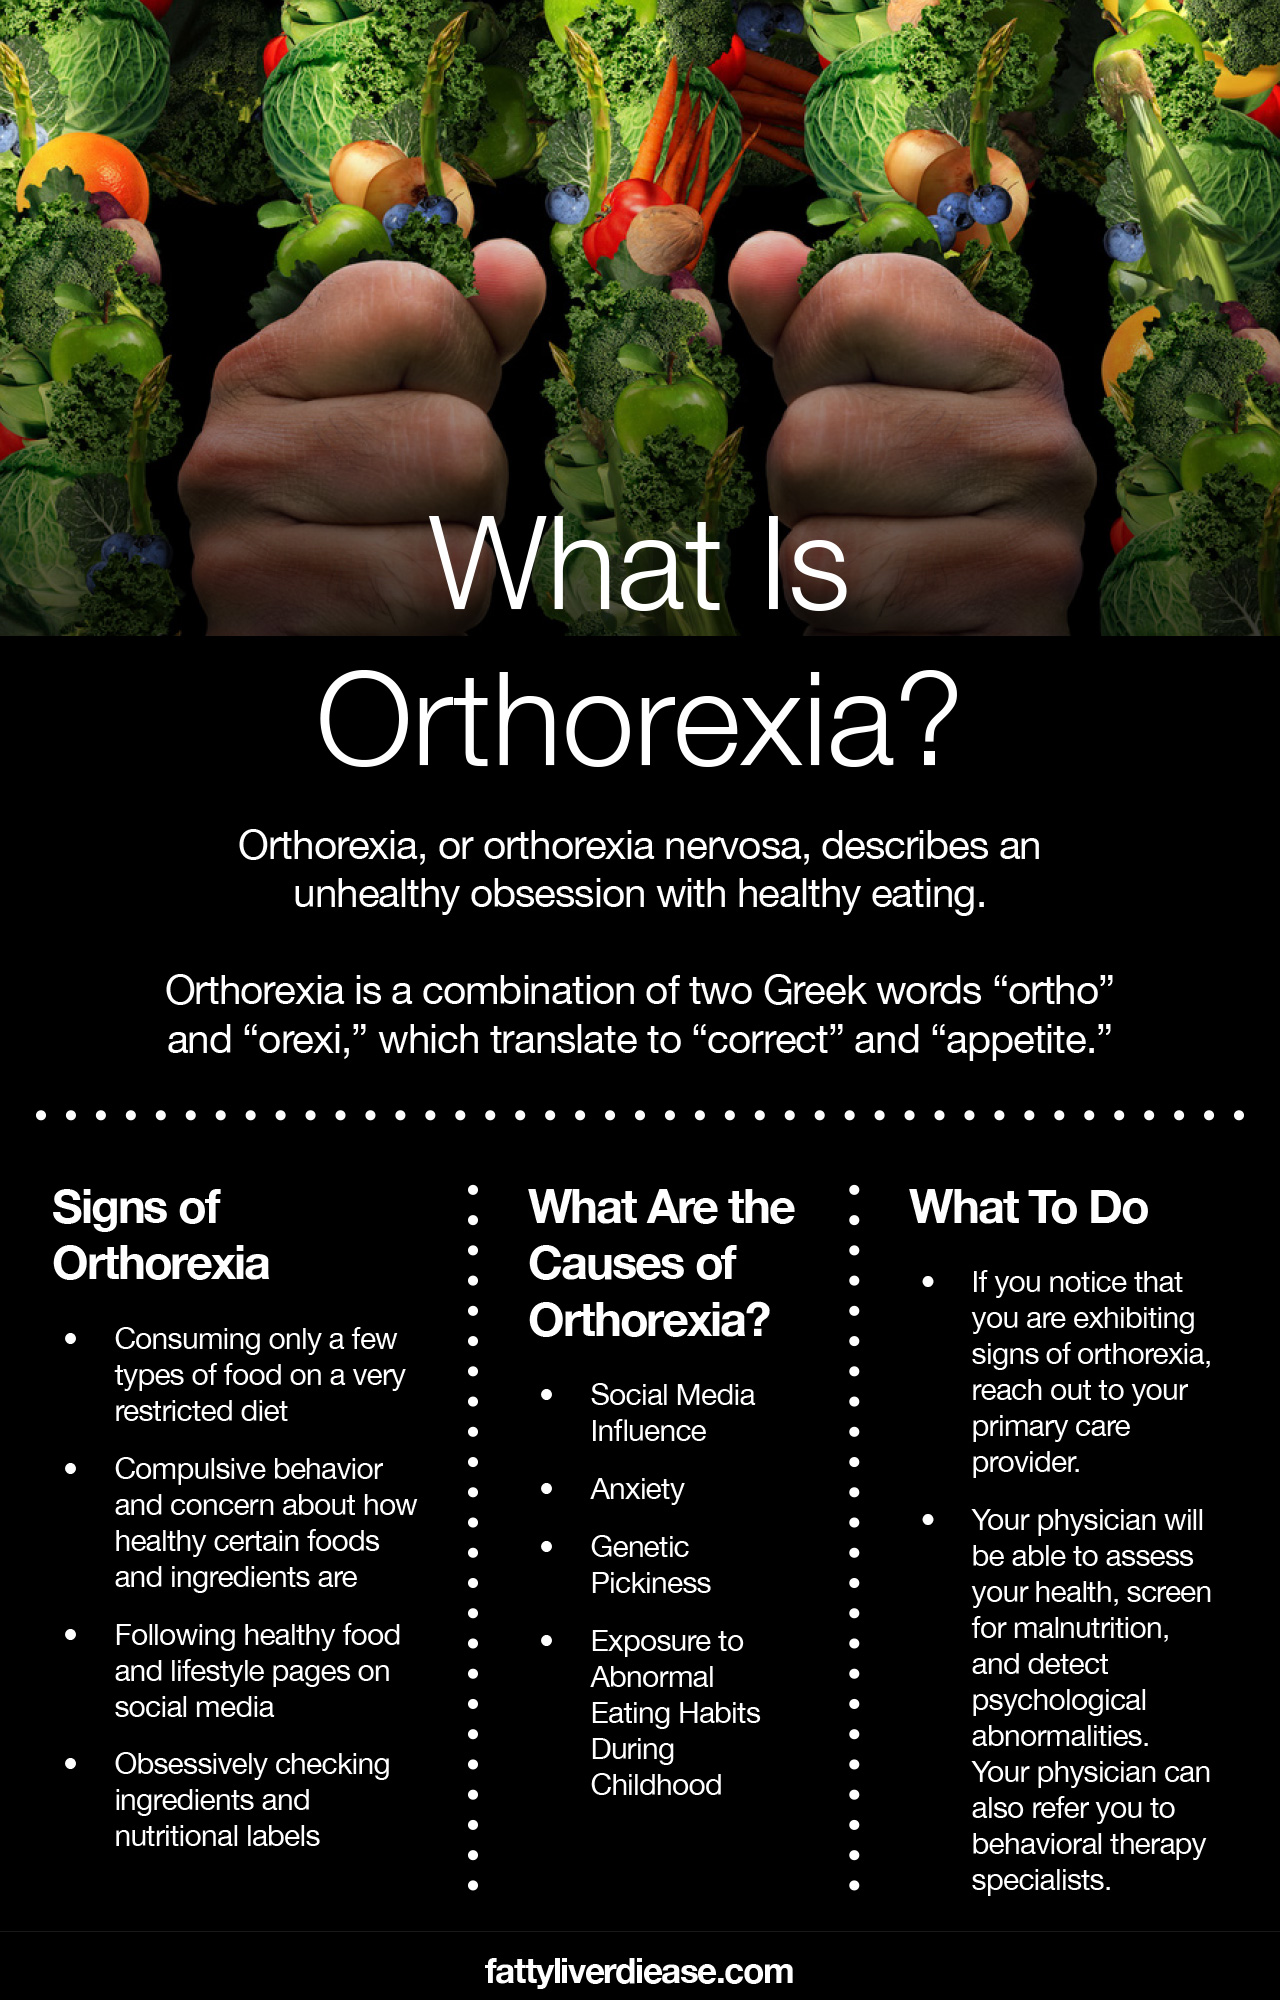 What Is Orthorexia